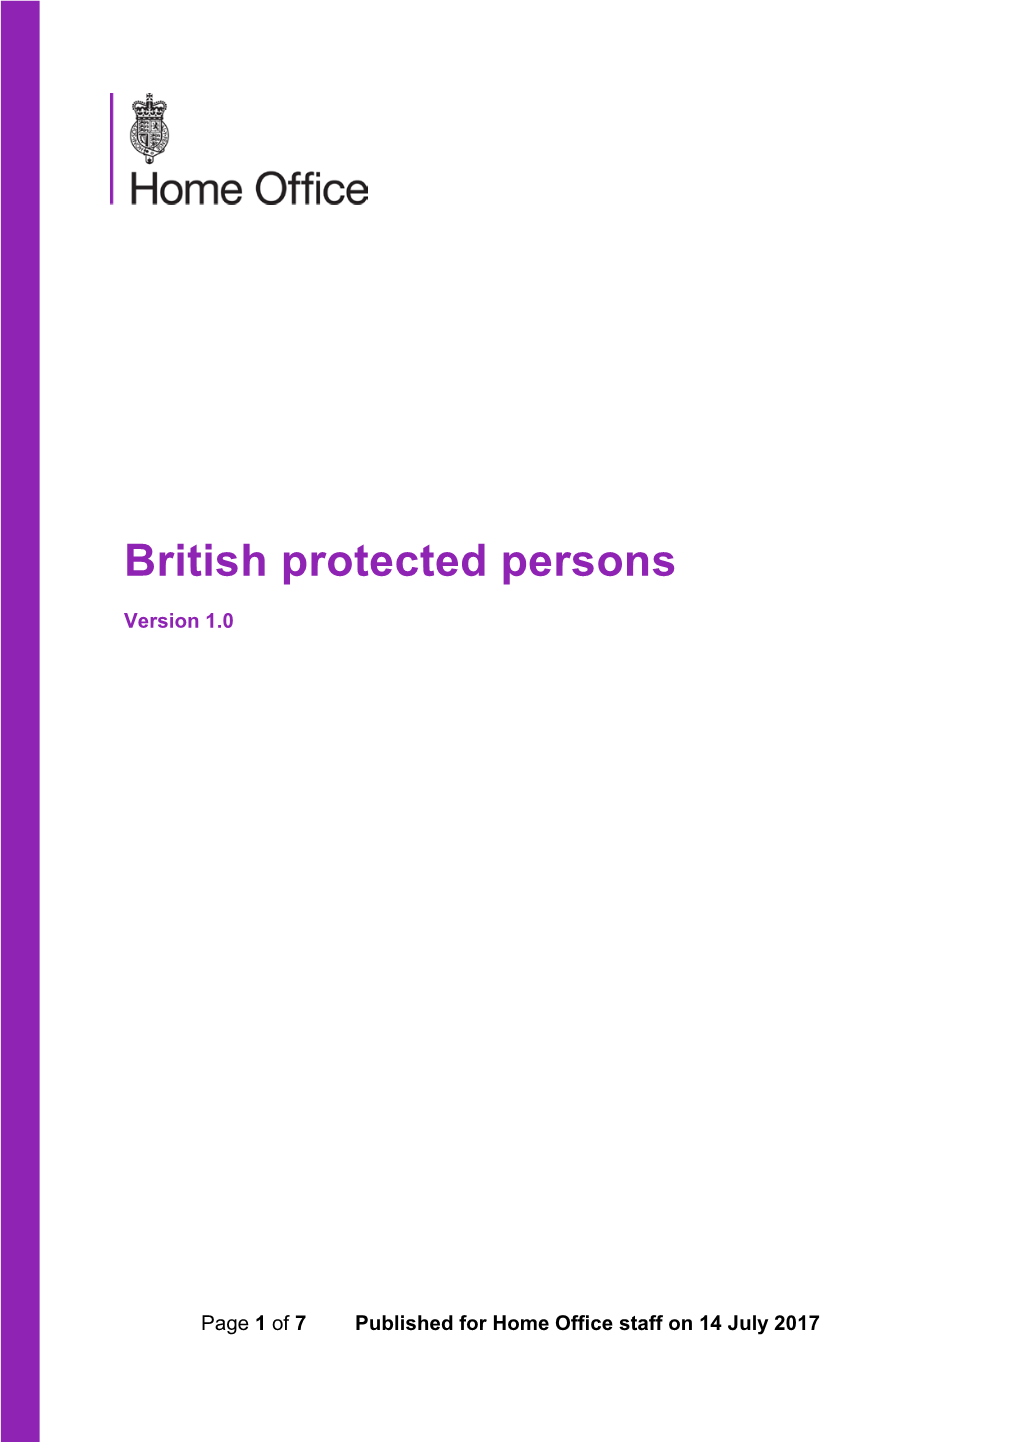 British Protected Persons